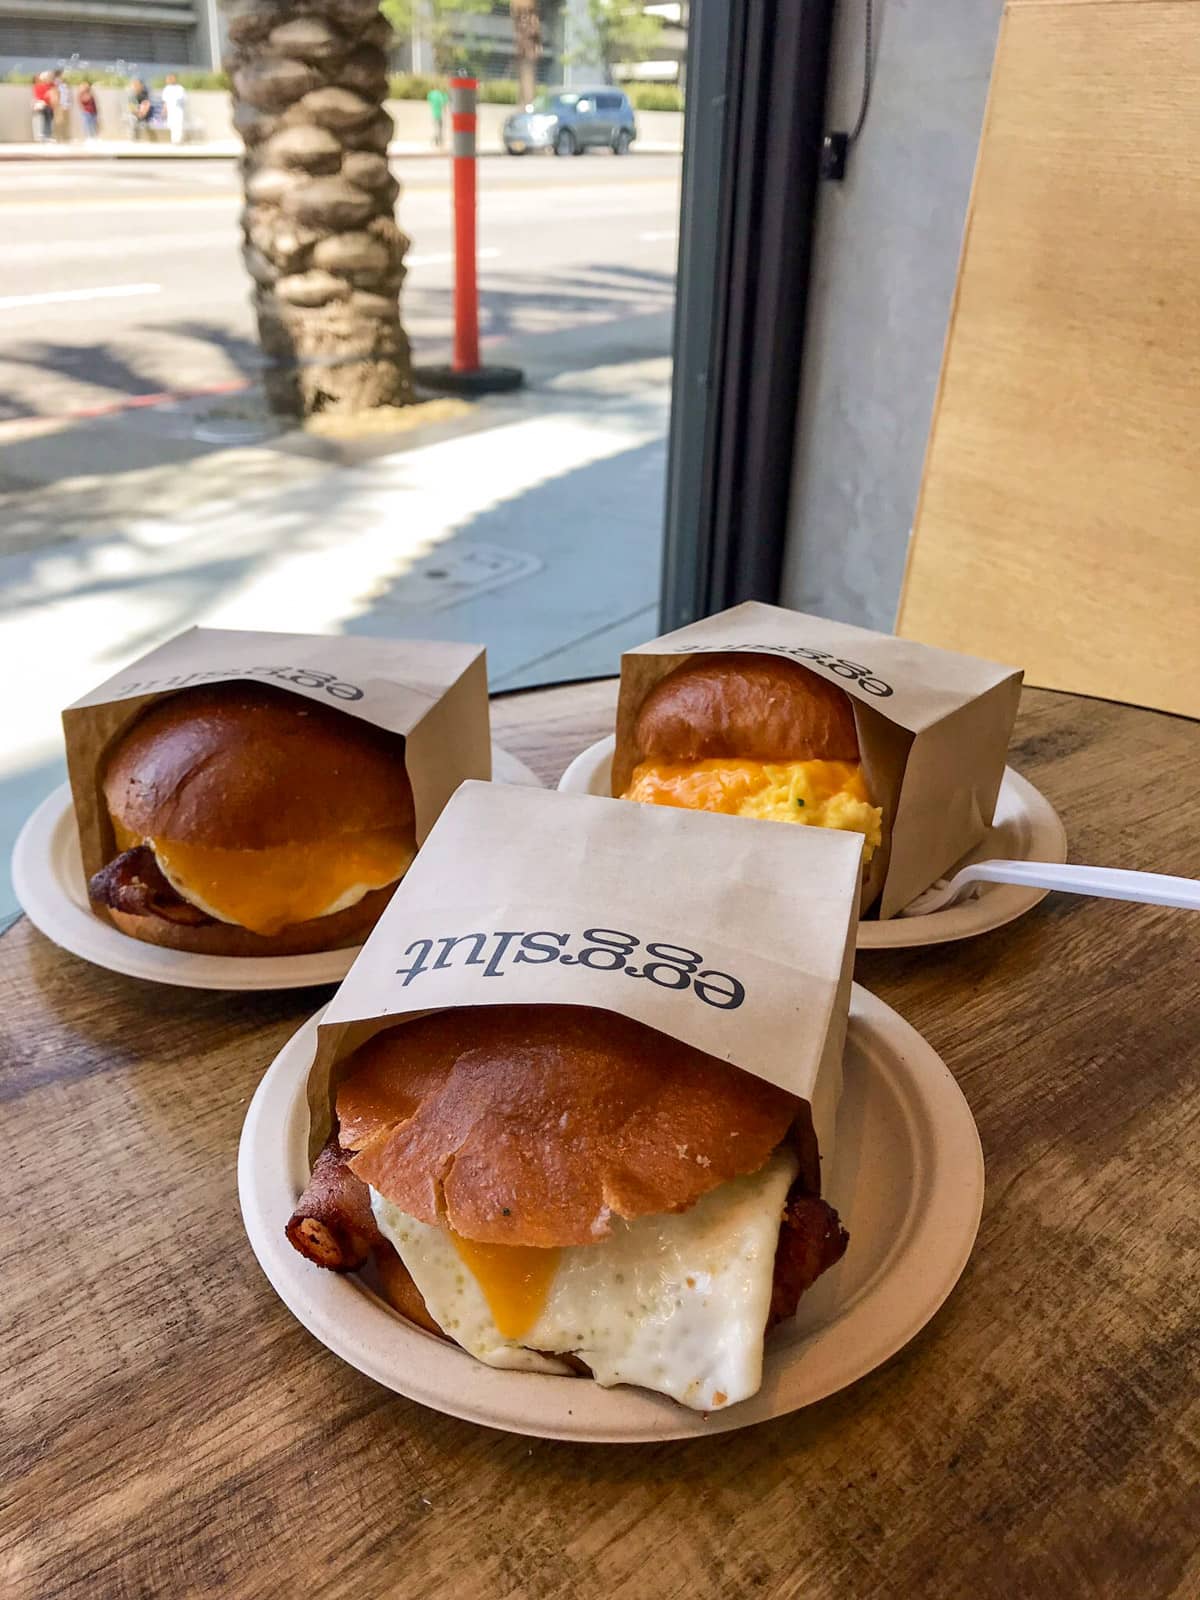 Three egg burgers, individually served in small brown paper bags with the text â€œeggslutâ€� printed on them. They are all sitting on brown paper plates on a wooden table